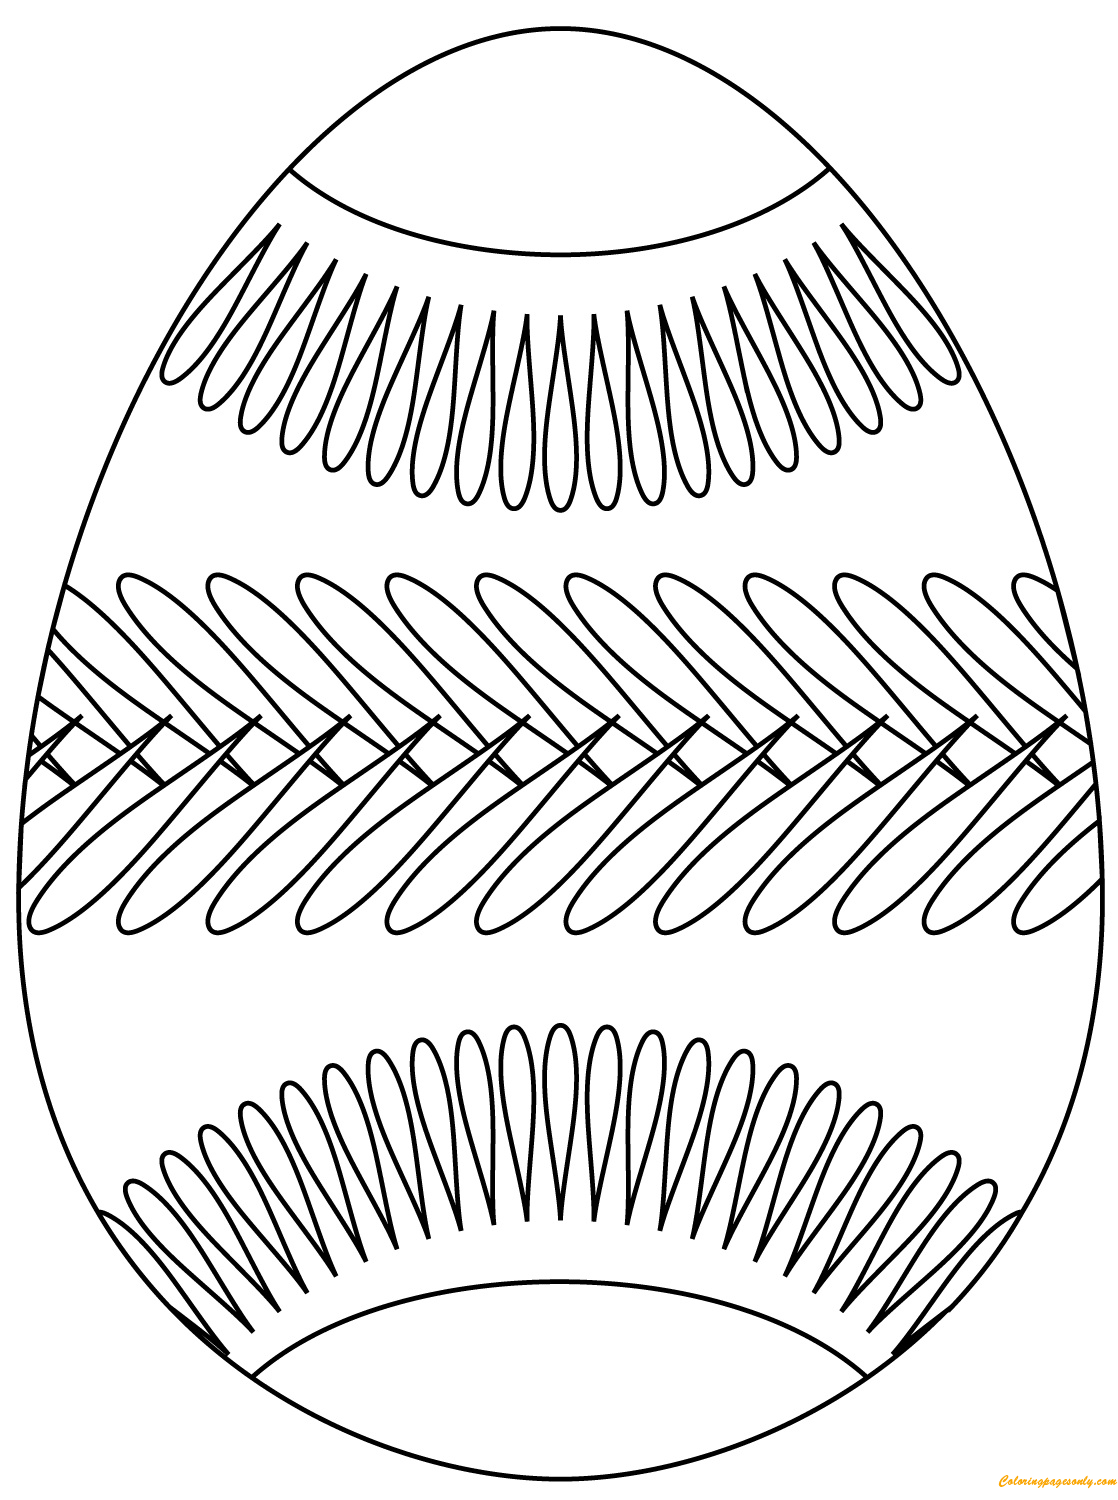 A Belt Pattern Easter Egg Coloring Page